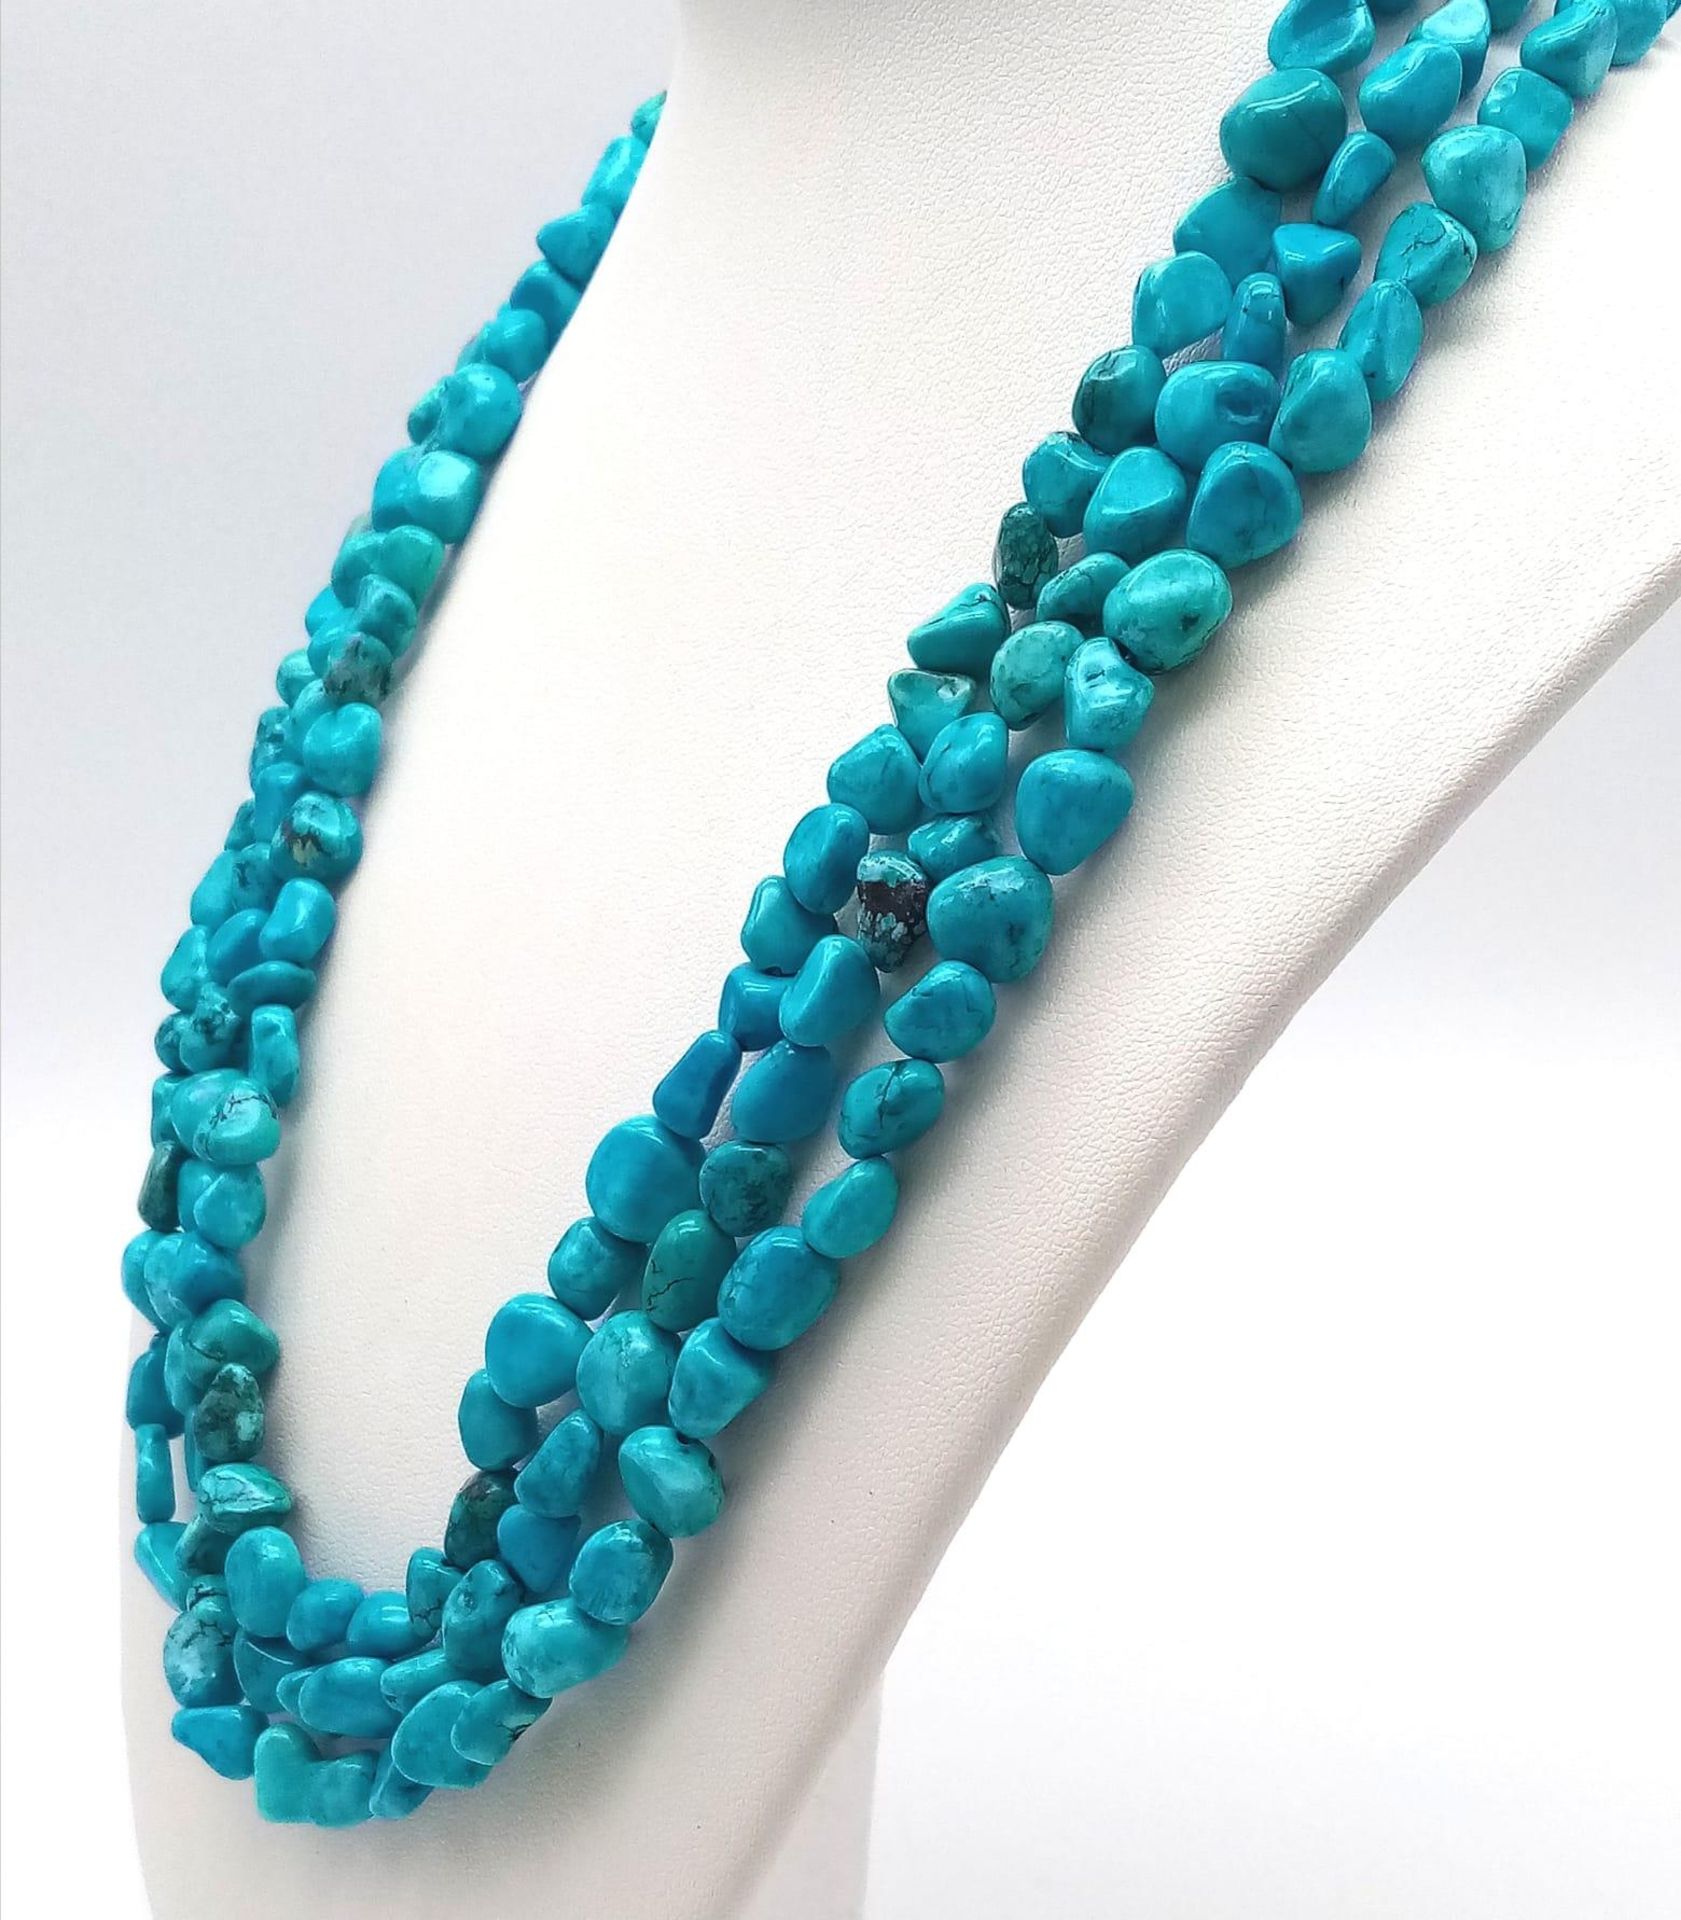 Two Natural Rough Gemstone Rope Length Necklaces. Lapis Lazuli and Turquoise. Both 150cm. - Image 3 of 6